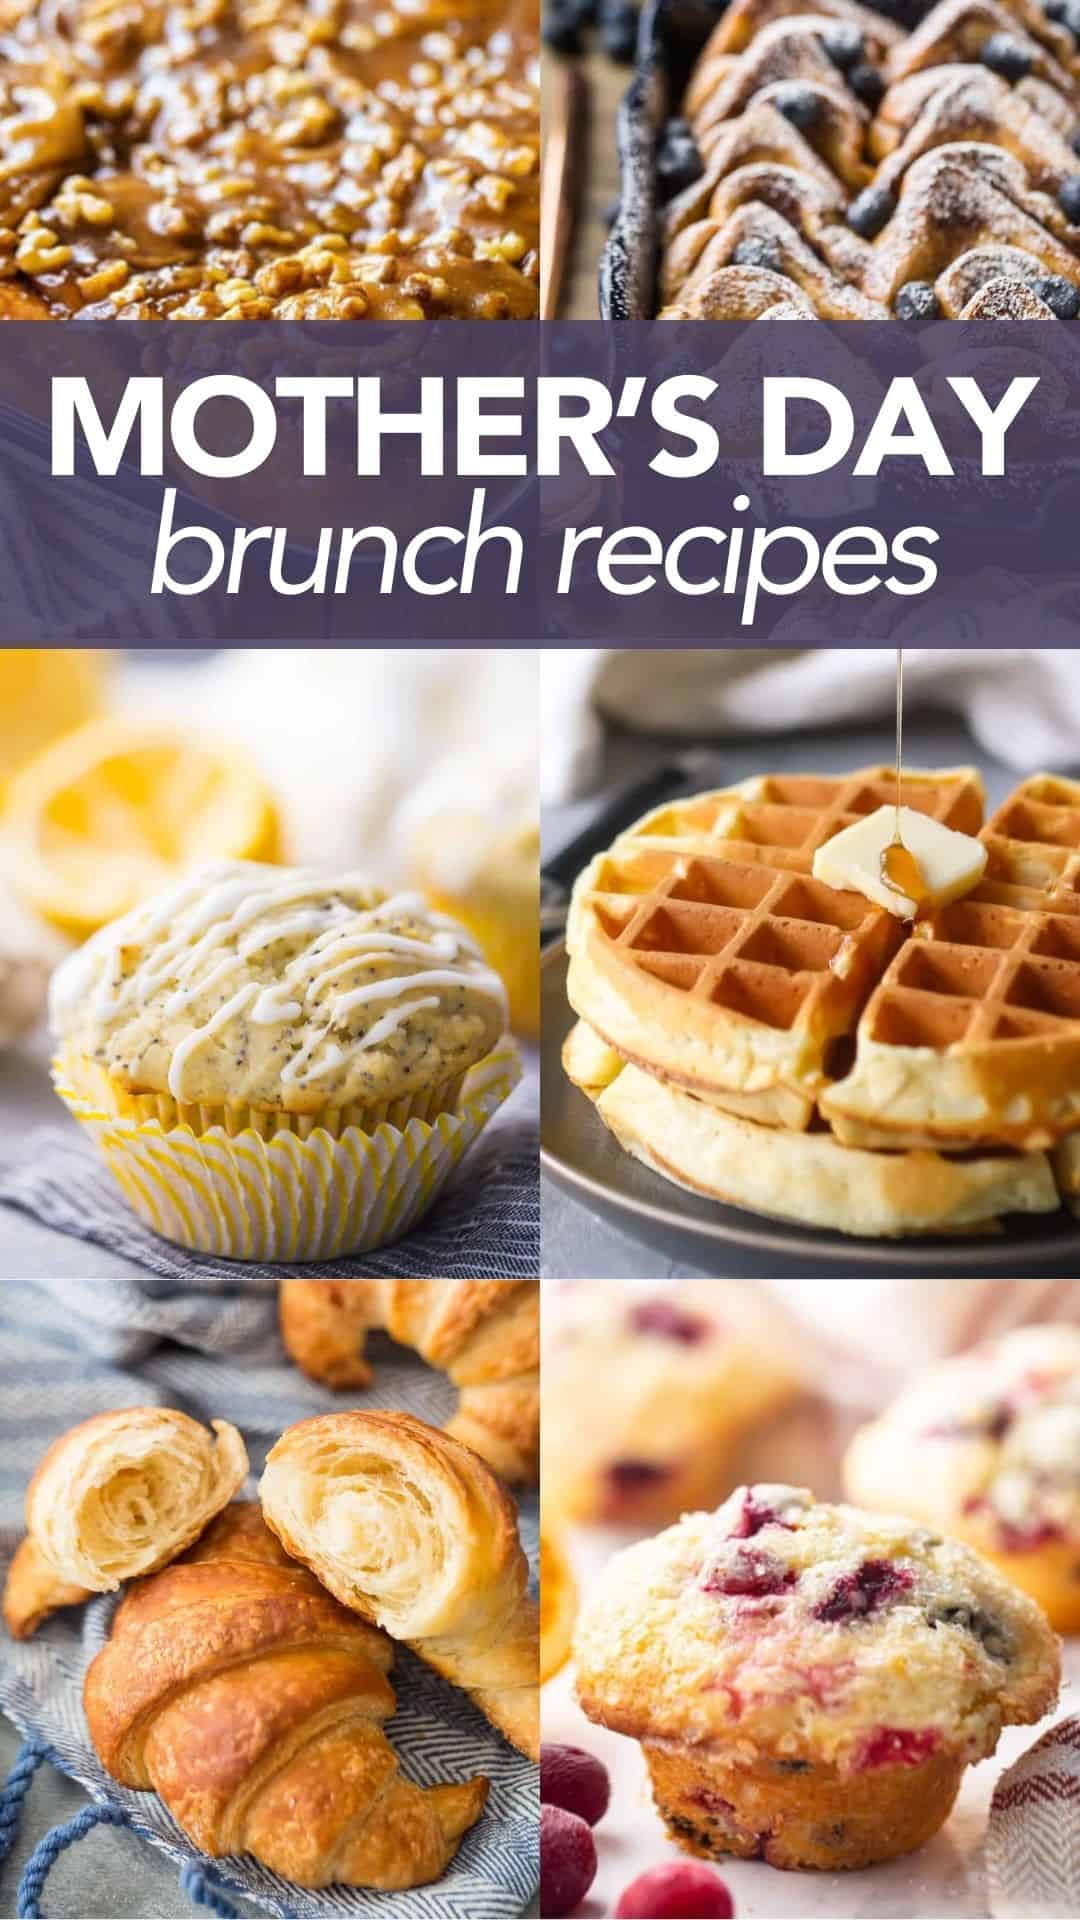 collage of Mother's Day brunch recipes including muffins, waffles, sticky buns, french toast and croissants.